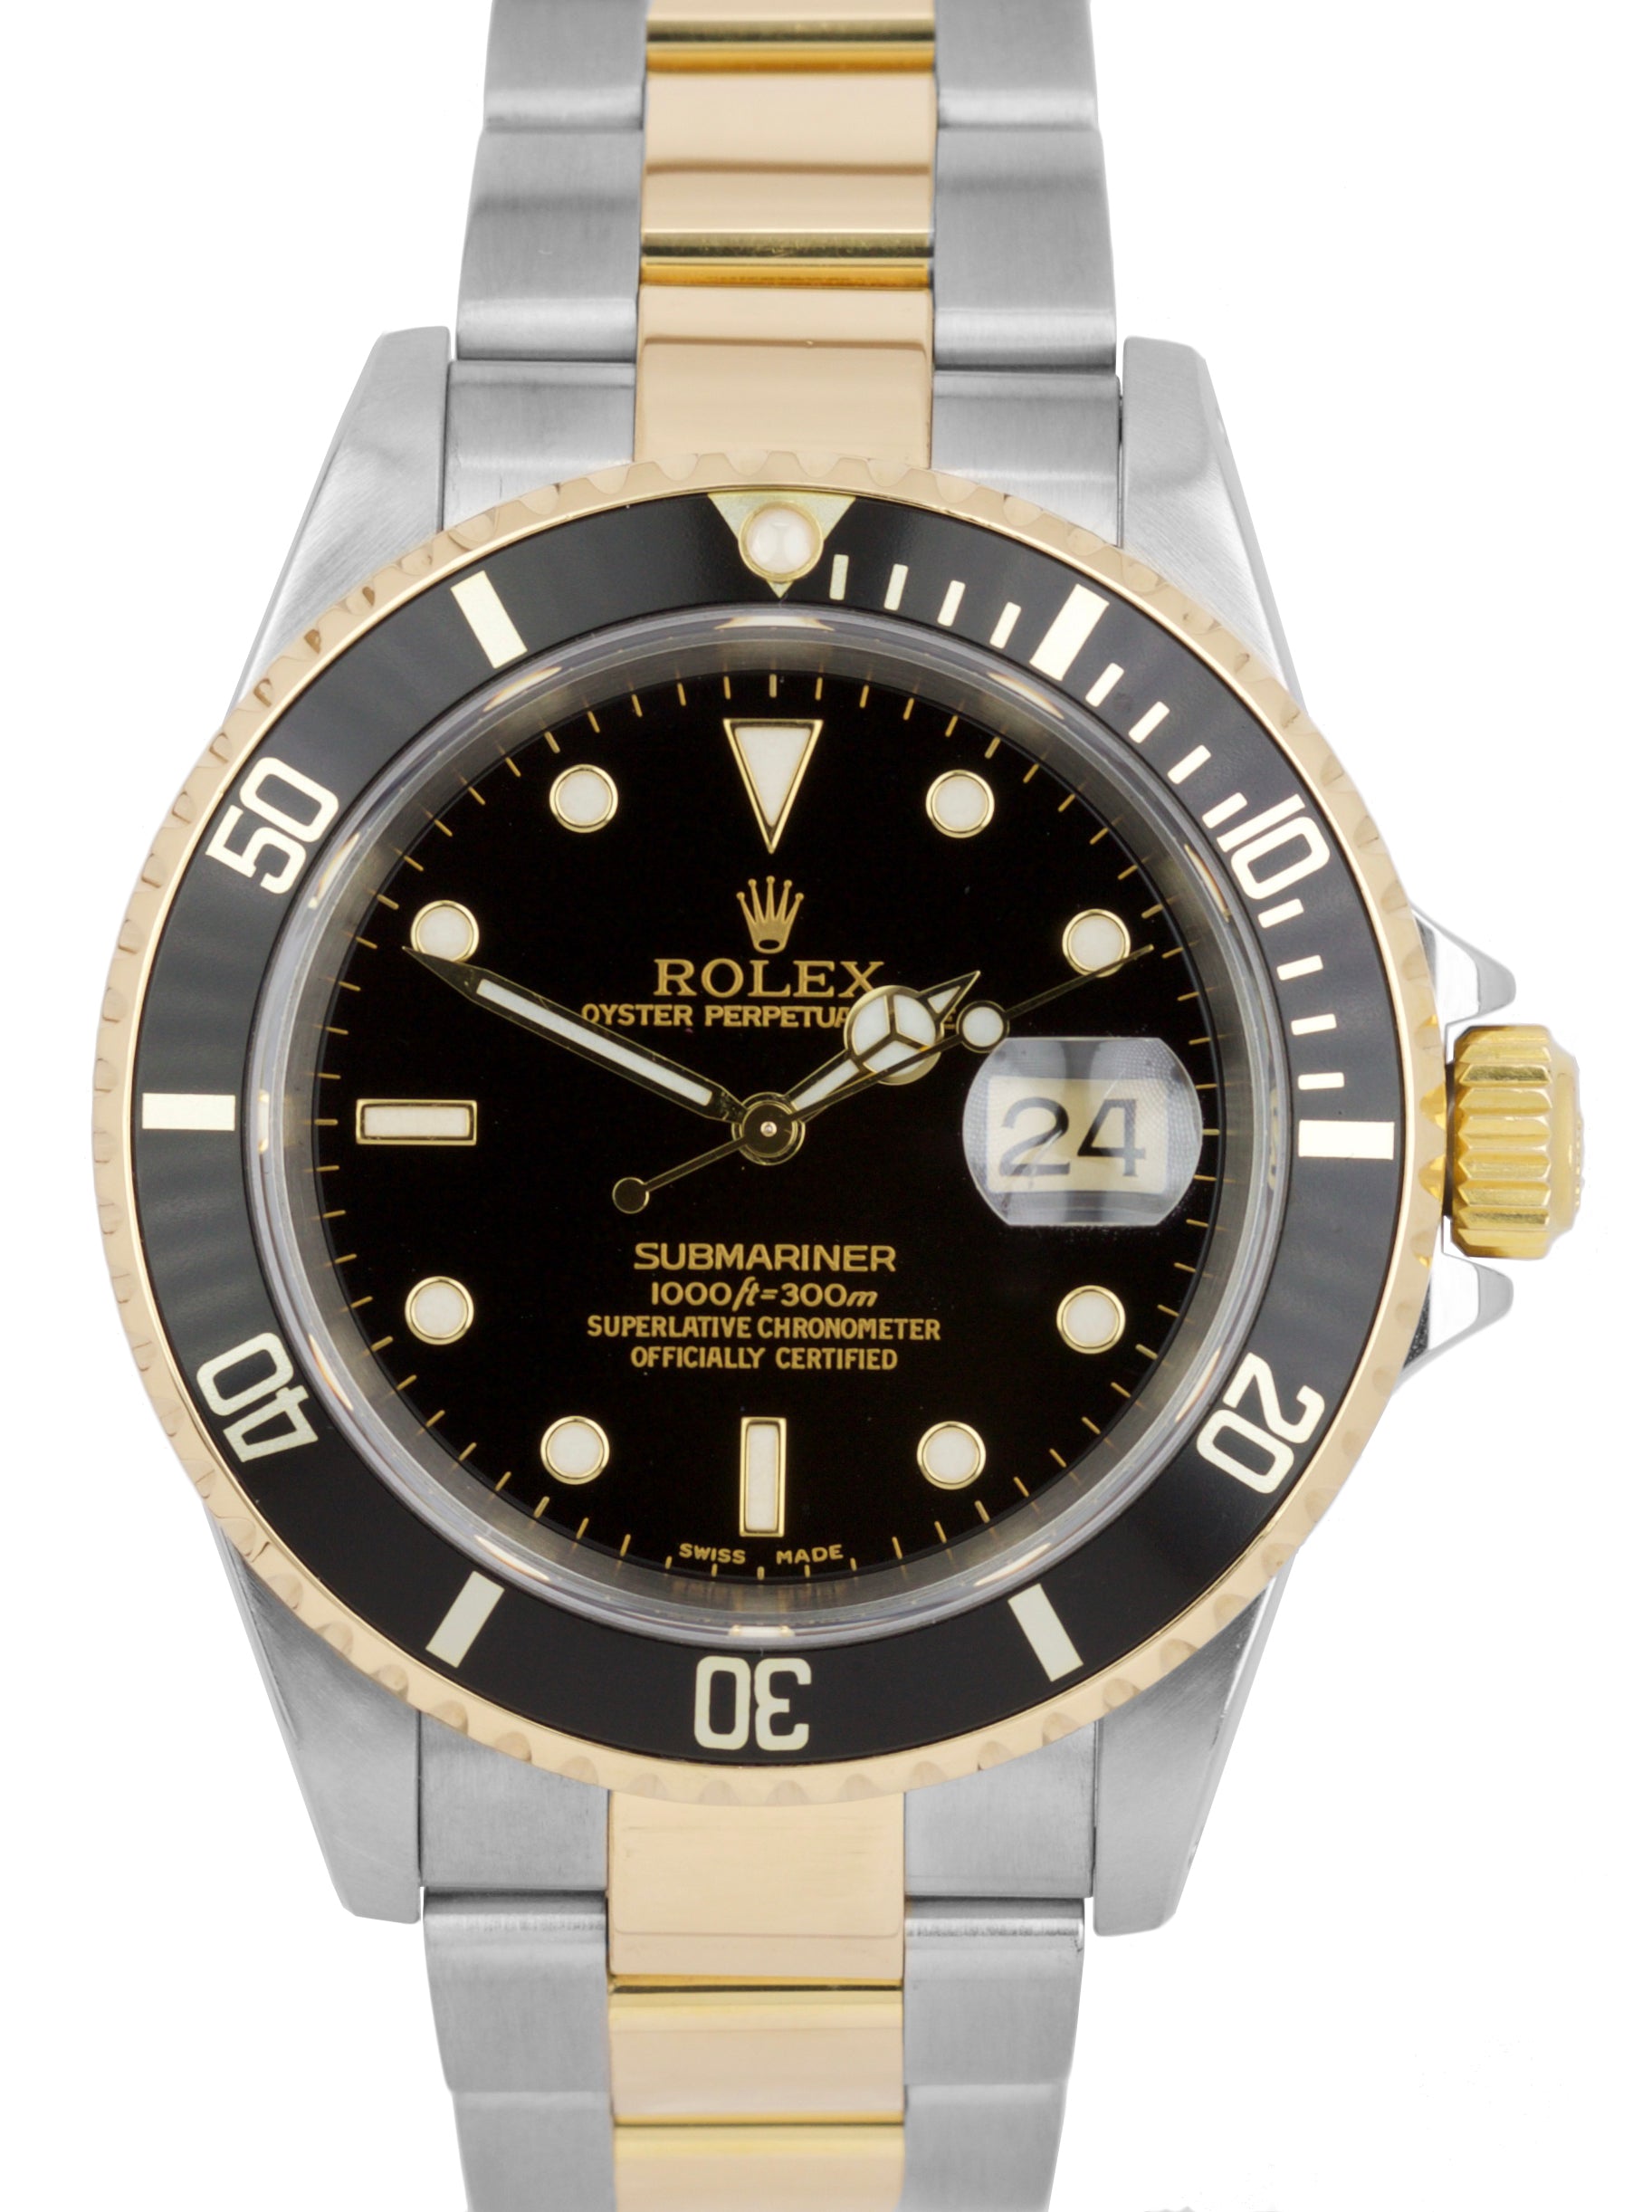 MINT 2002 Rolex Submariner 16613 Two-Tone Stainless Black Dive 40mm Wa